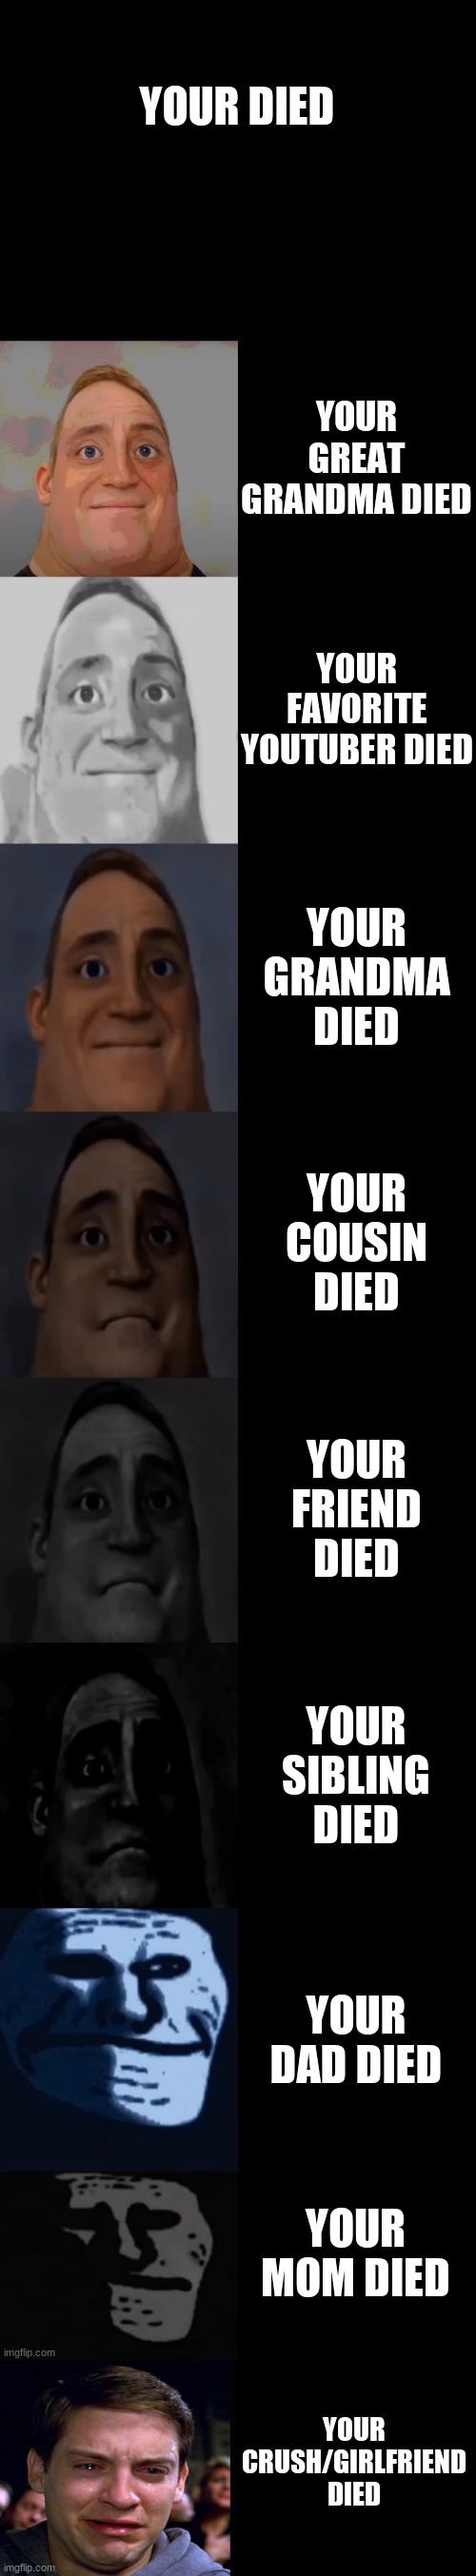 version 2,last phase idea by MilanoBucocko comment | YOUR DIED; YOUR GREAT GRANDMA DIED; YOUR FAVORITE YOUTUBER DIED; YOUR GRANDMA DIED; YOUR COUSIN DIED; YOUR FRIEND DIED; YOUR SIBLING DIED; YOUR DAD DIED; YOUR MOM DIED; YOUR CRUSH/GIRLFRIEND DIED | image tagged in mr incredible becoming sad | made w/ Imgflip meme maker